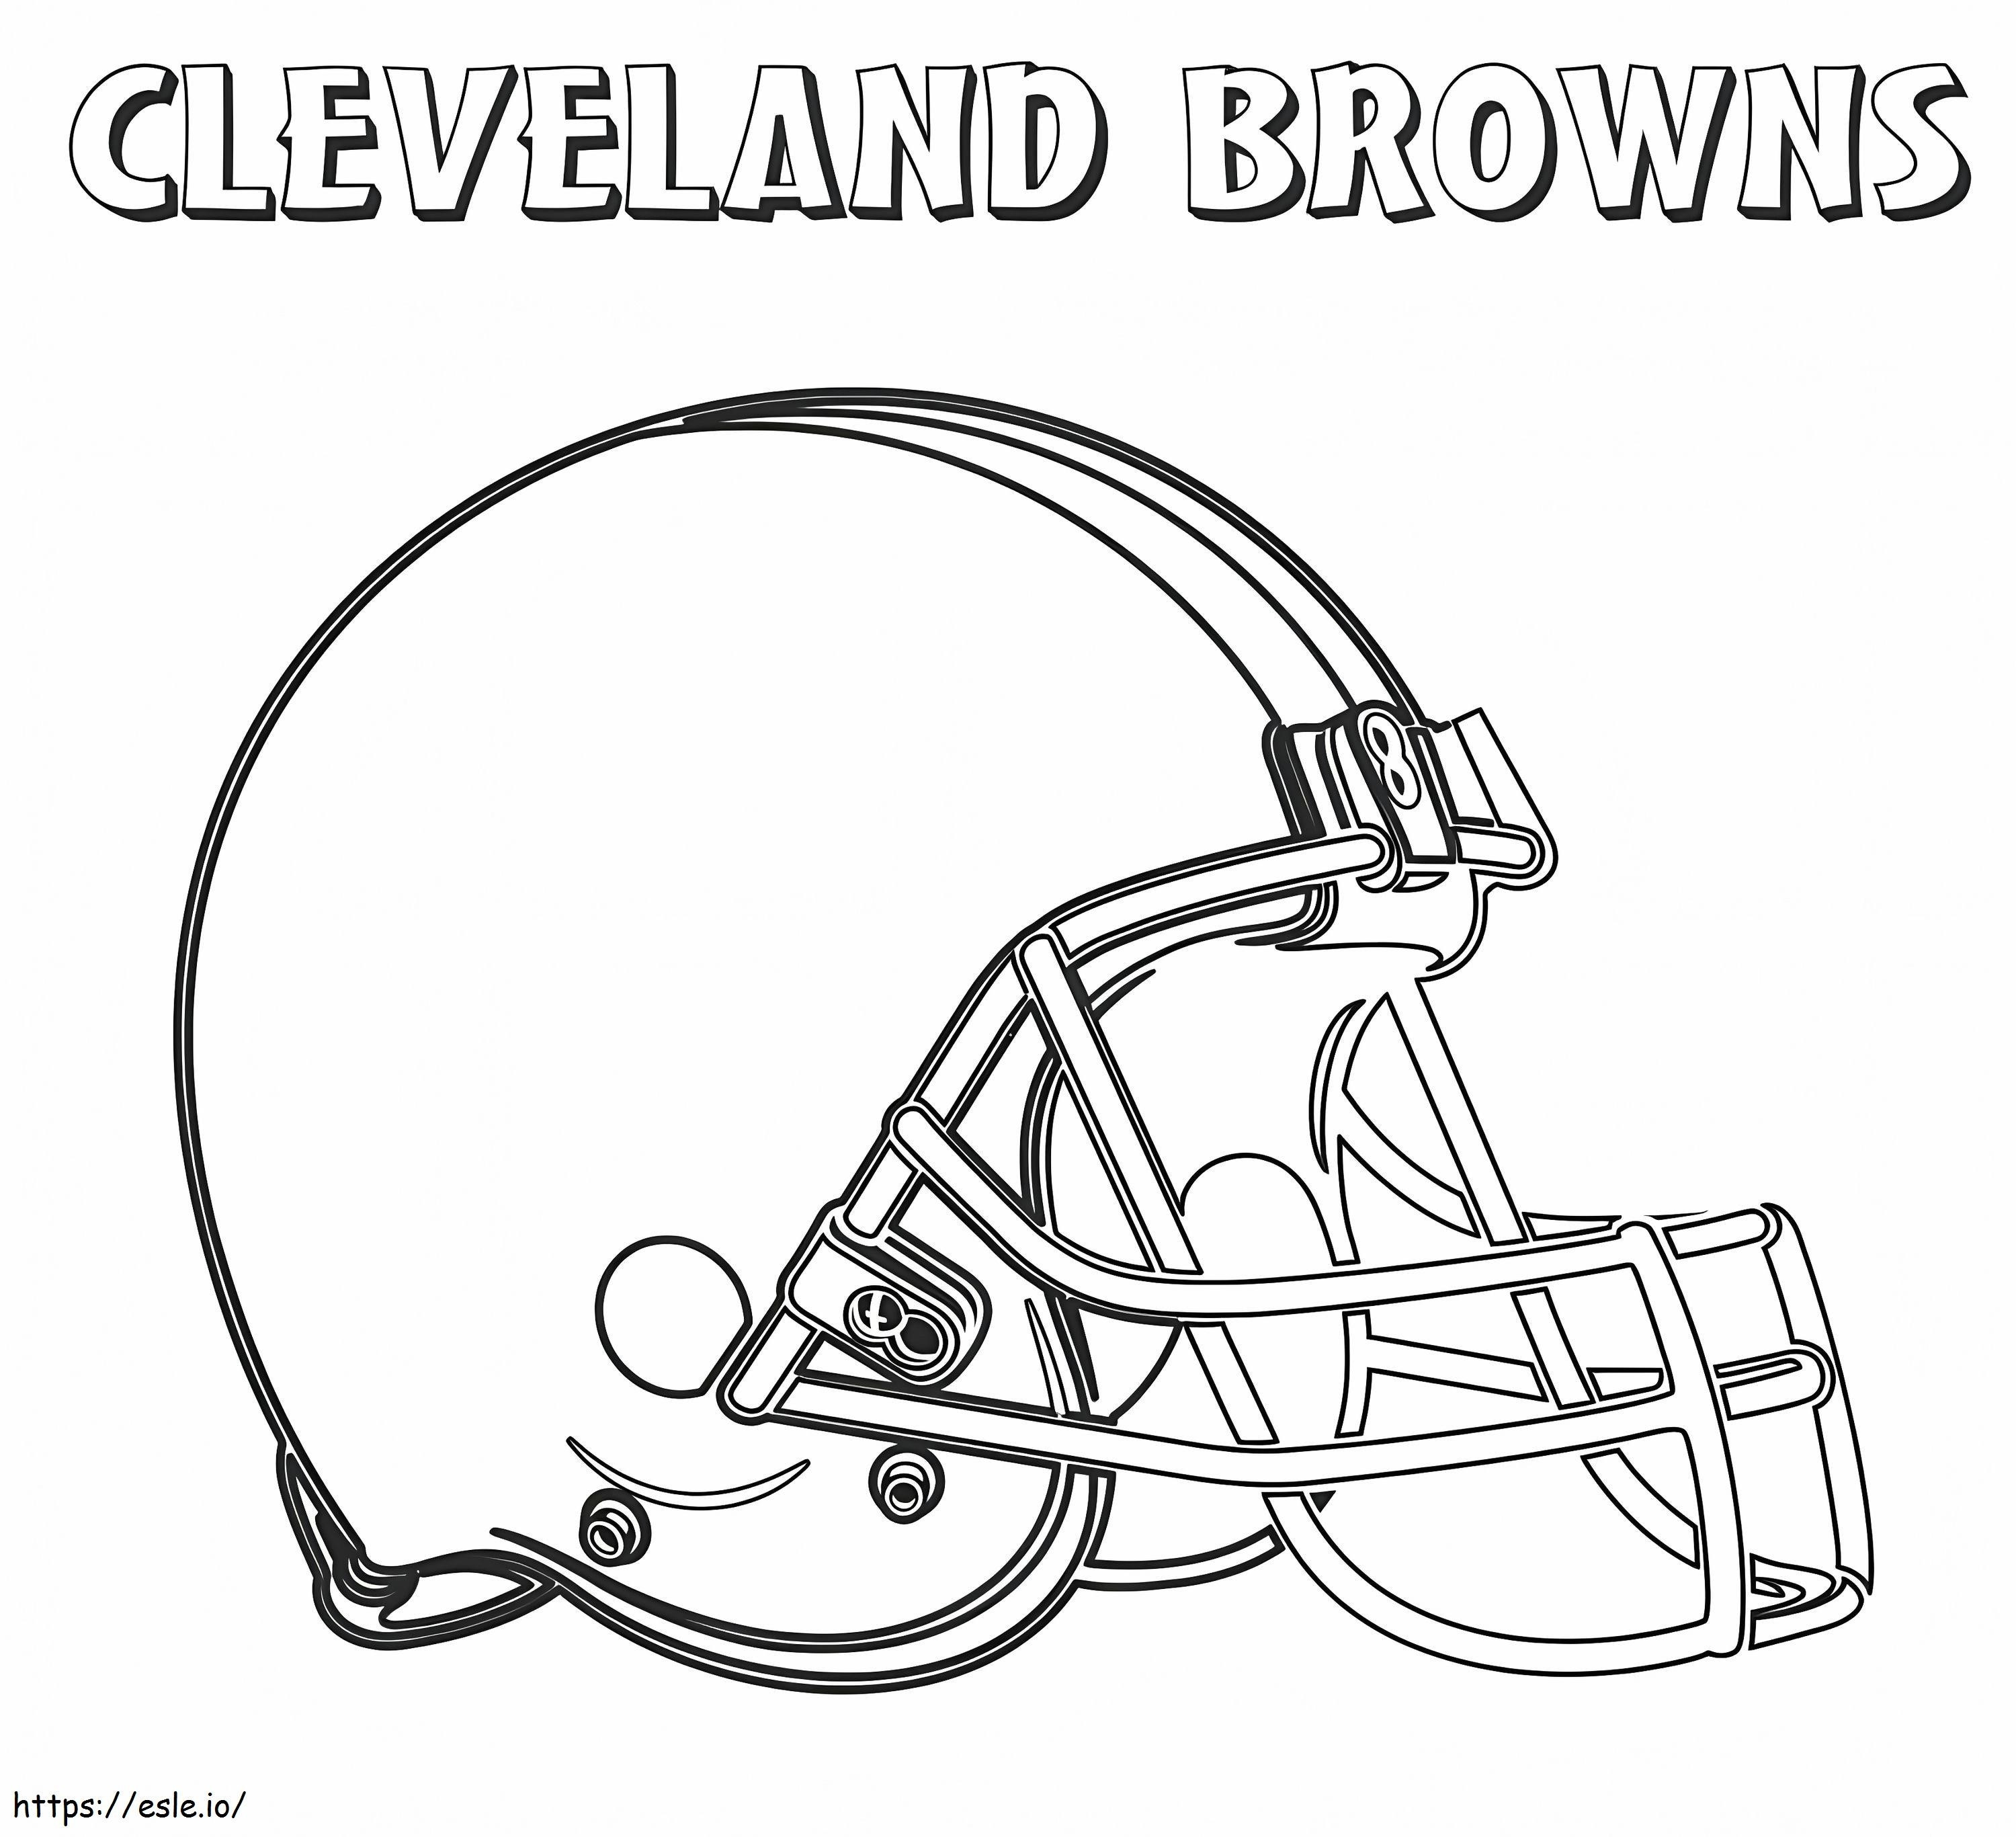 Cleveland Browns 1 coloring page